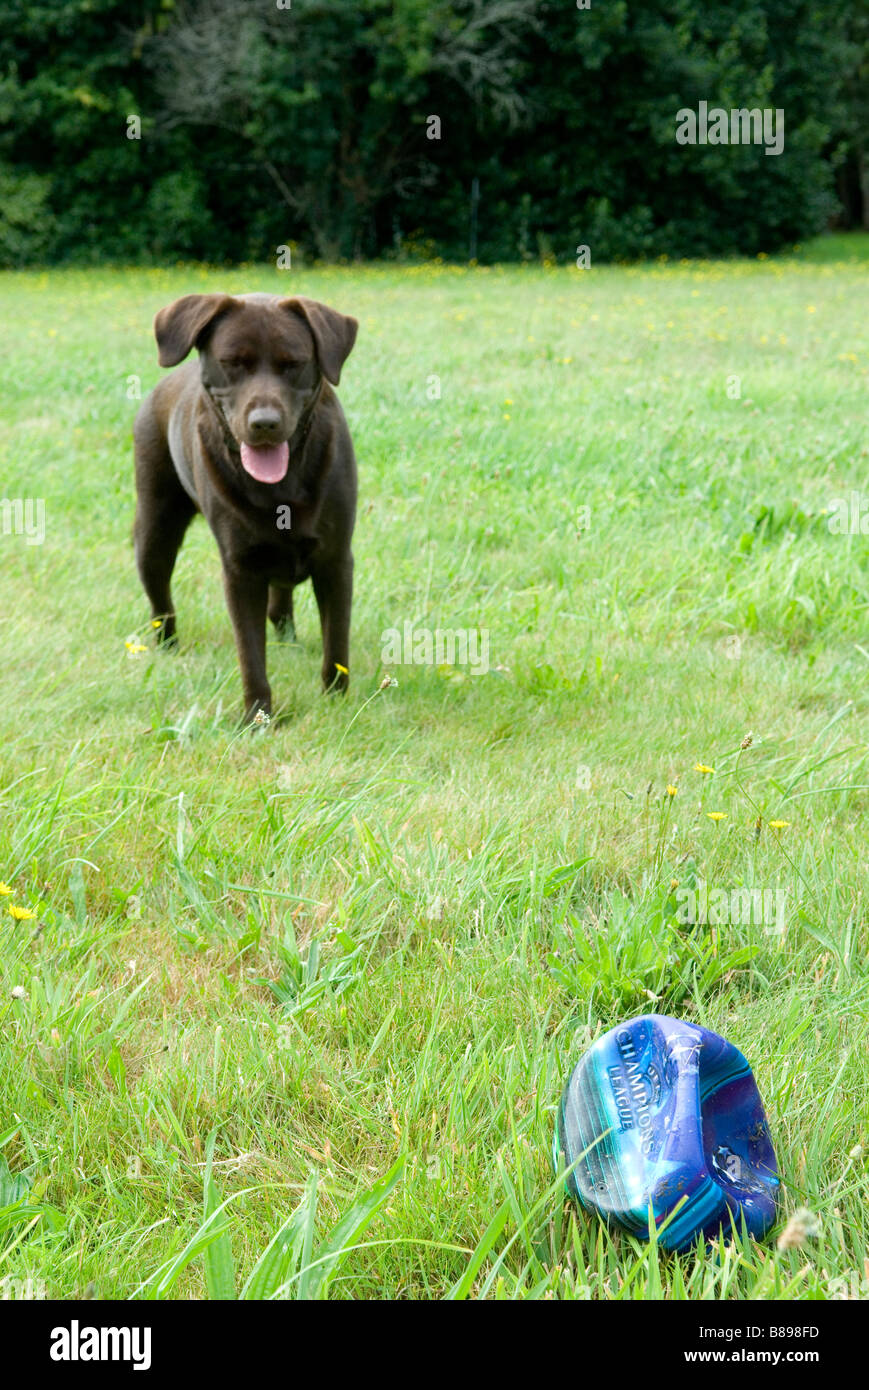 Dog playing with punctured football Stock Photo